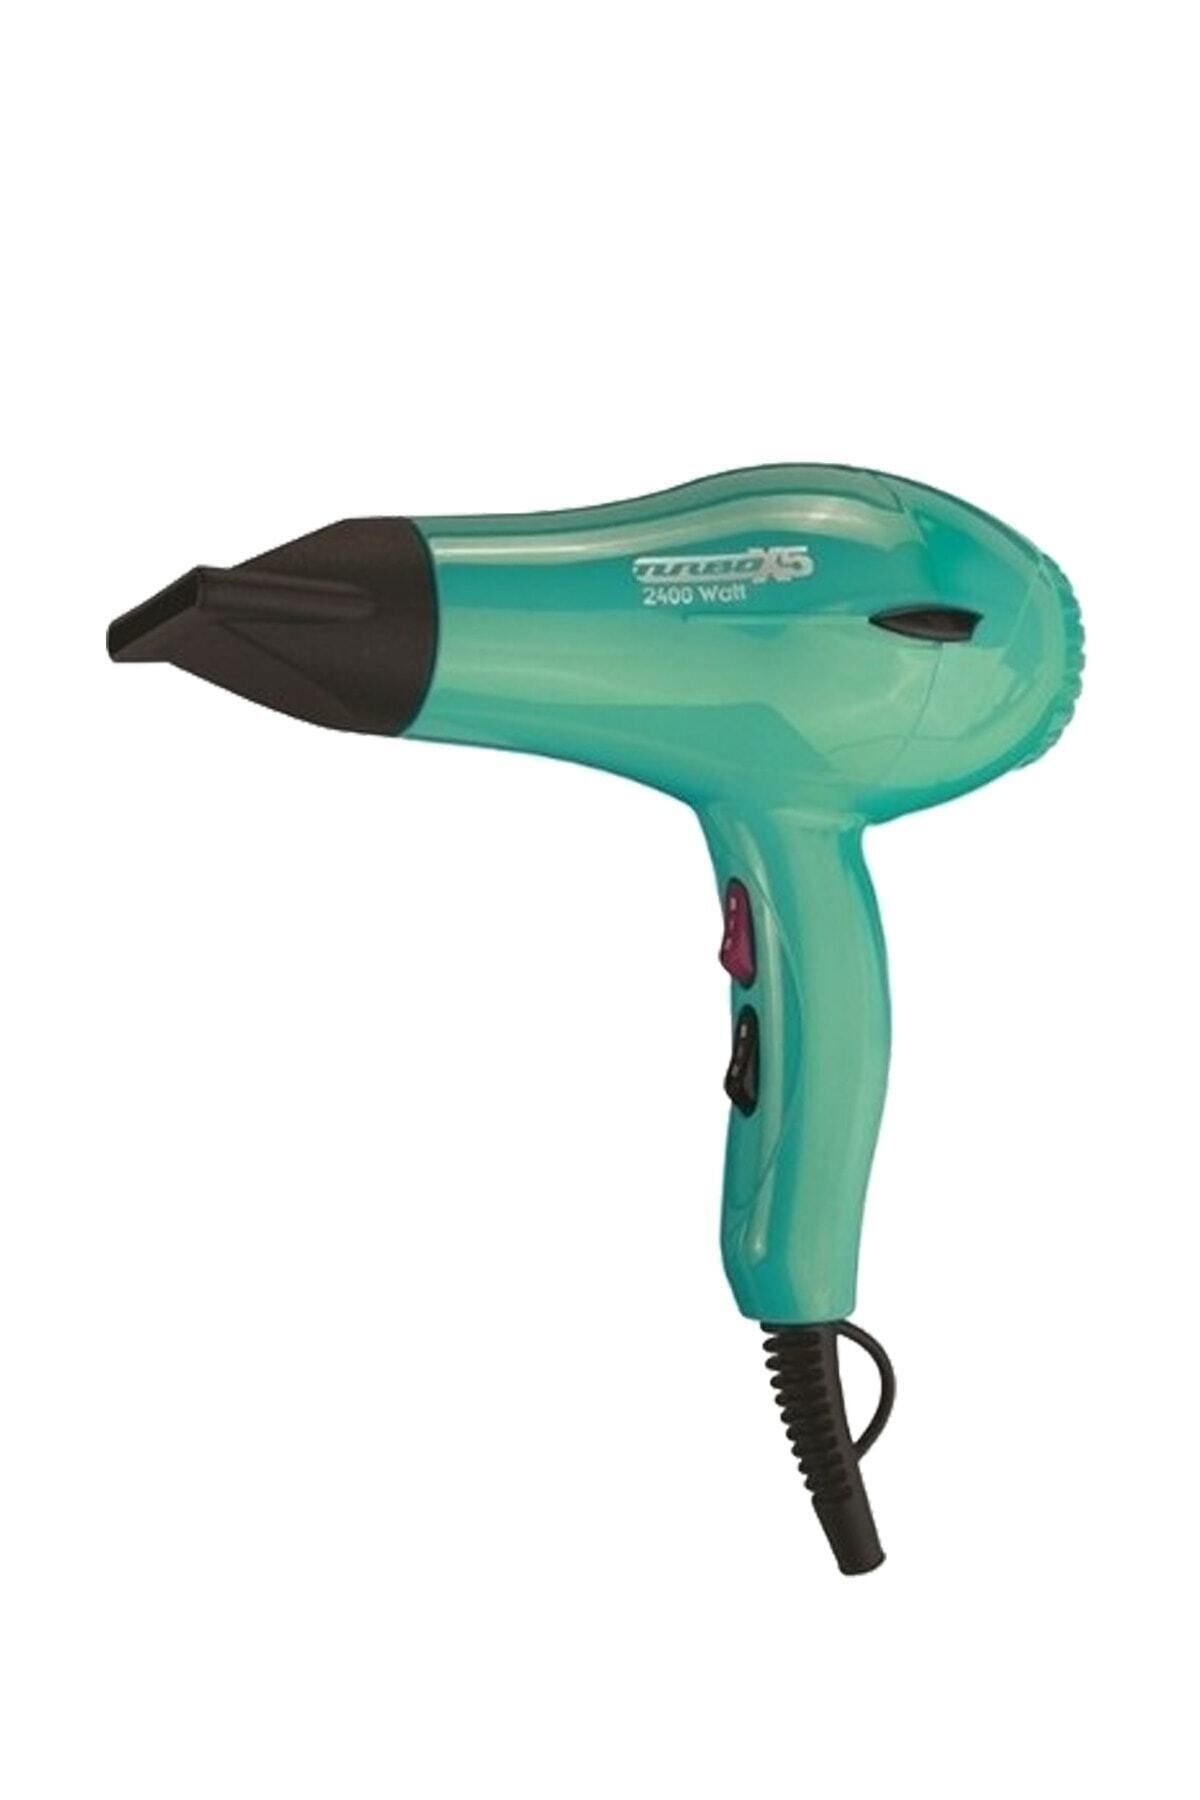 Hector New York Style Turbox5 2400w Blow Dryer (turquoise) HairDryer22